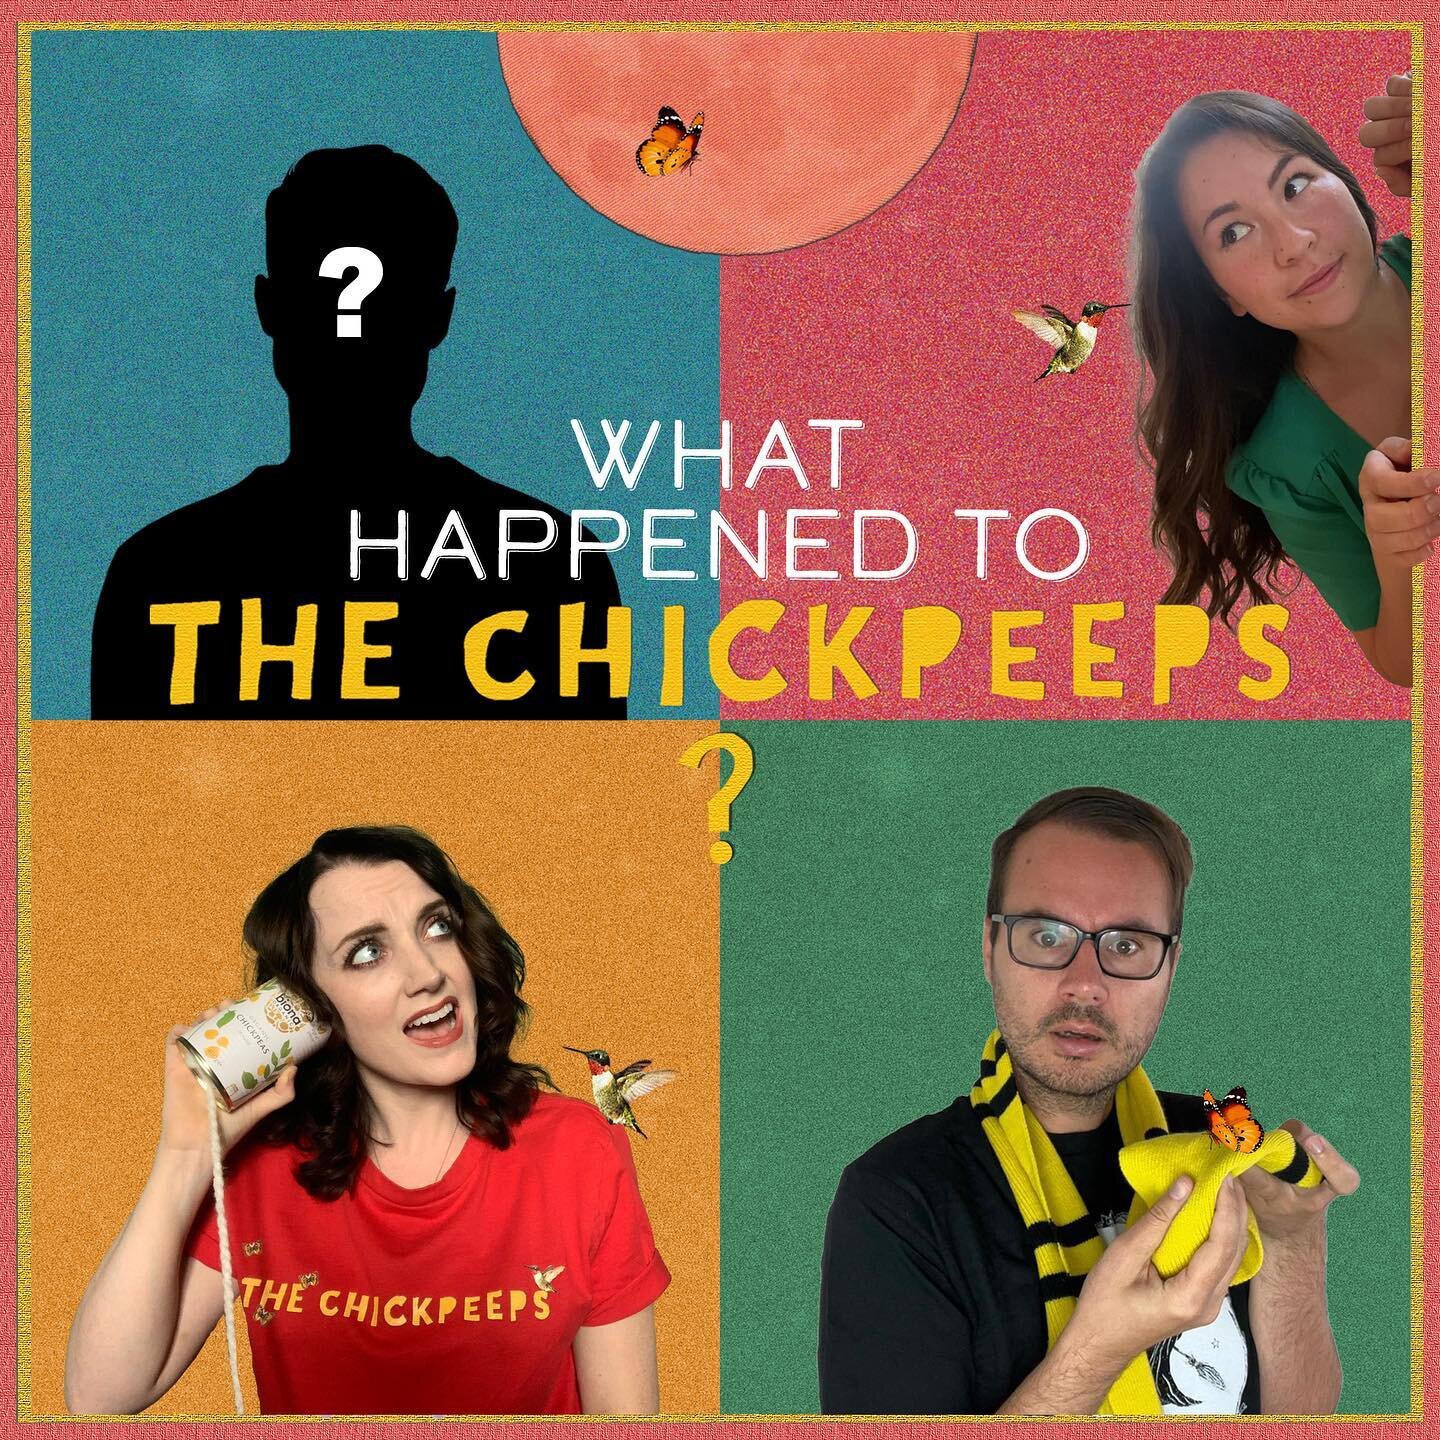 🎙️ New episode alert! WHAT HAPPENED TO THE CHICKPEEPS? ❓👤 live now wherever you get your podcasts!! 

Everything was going so well&hellip; It was Spring of 2021 and life was returning to a semblance of normality. We were leaving our beds to work, s